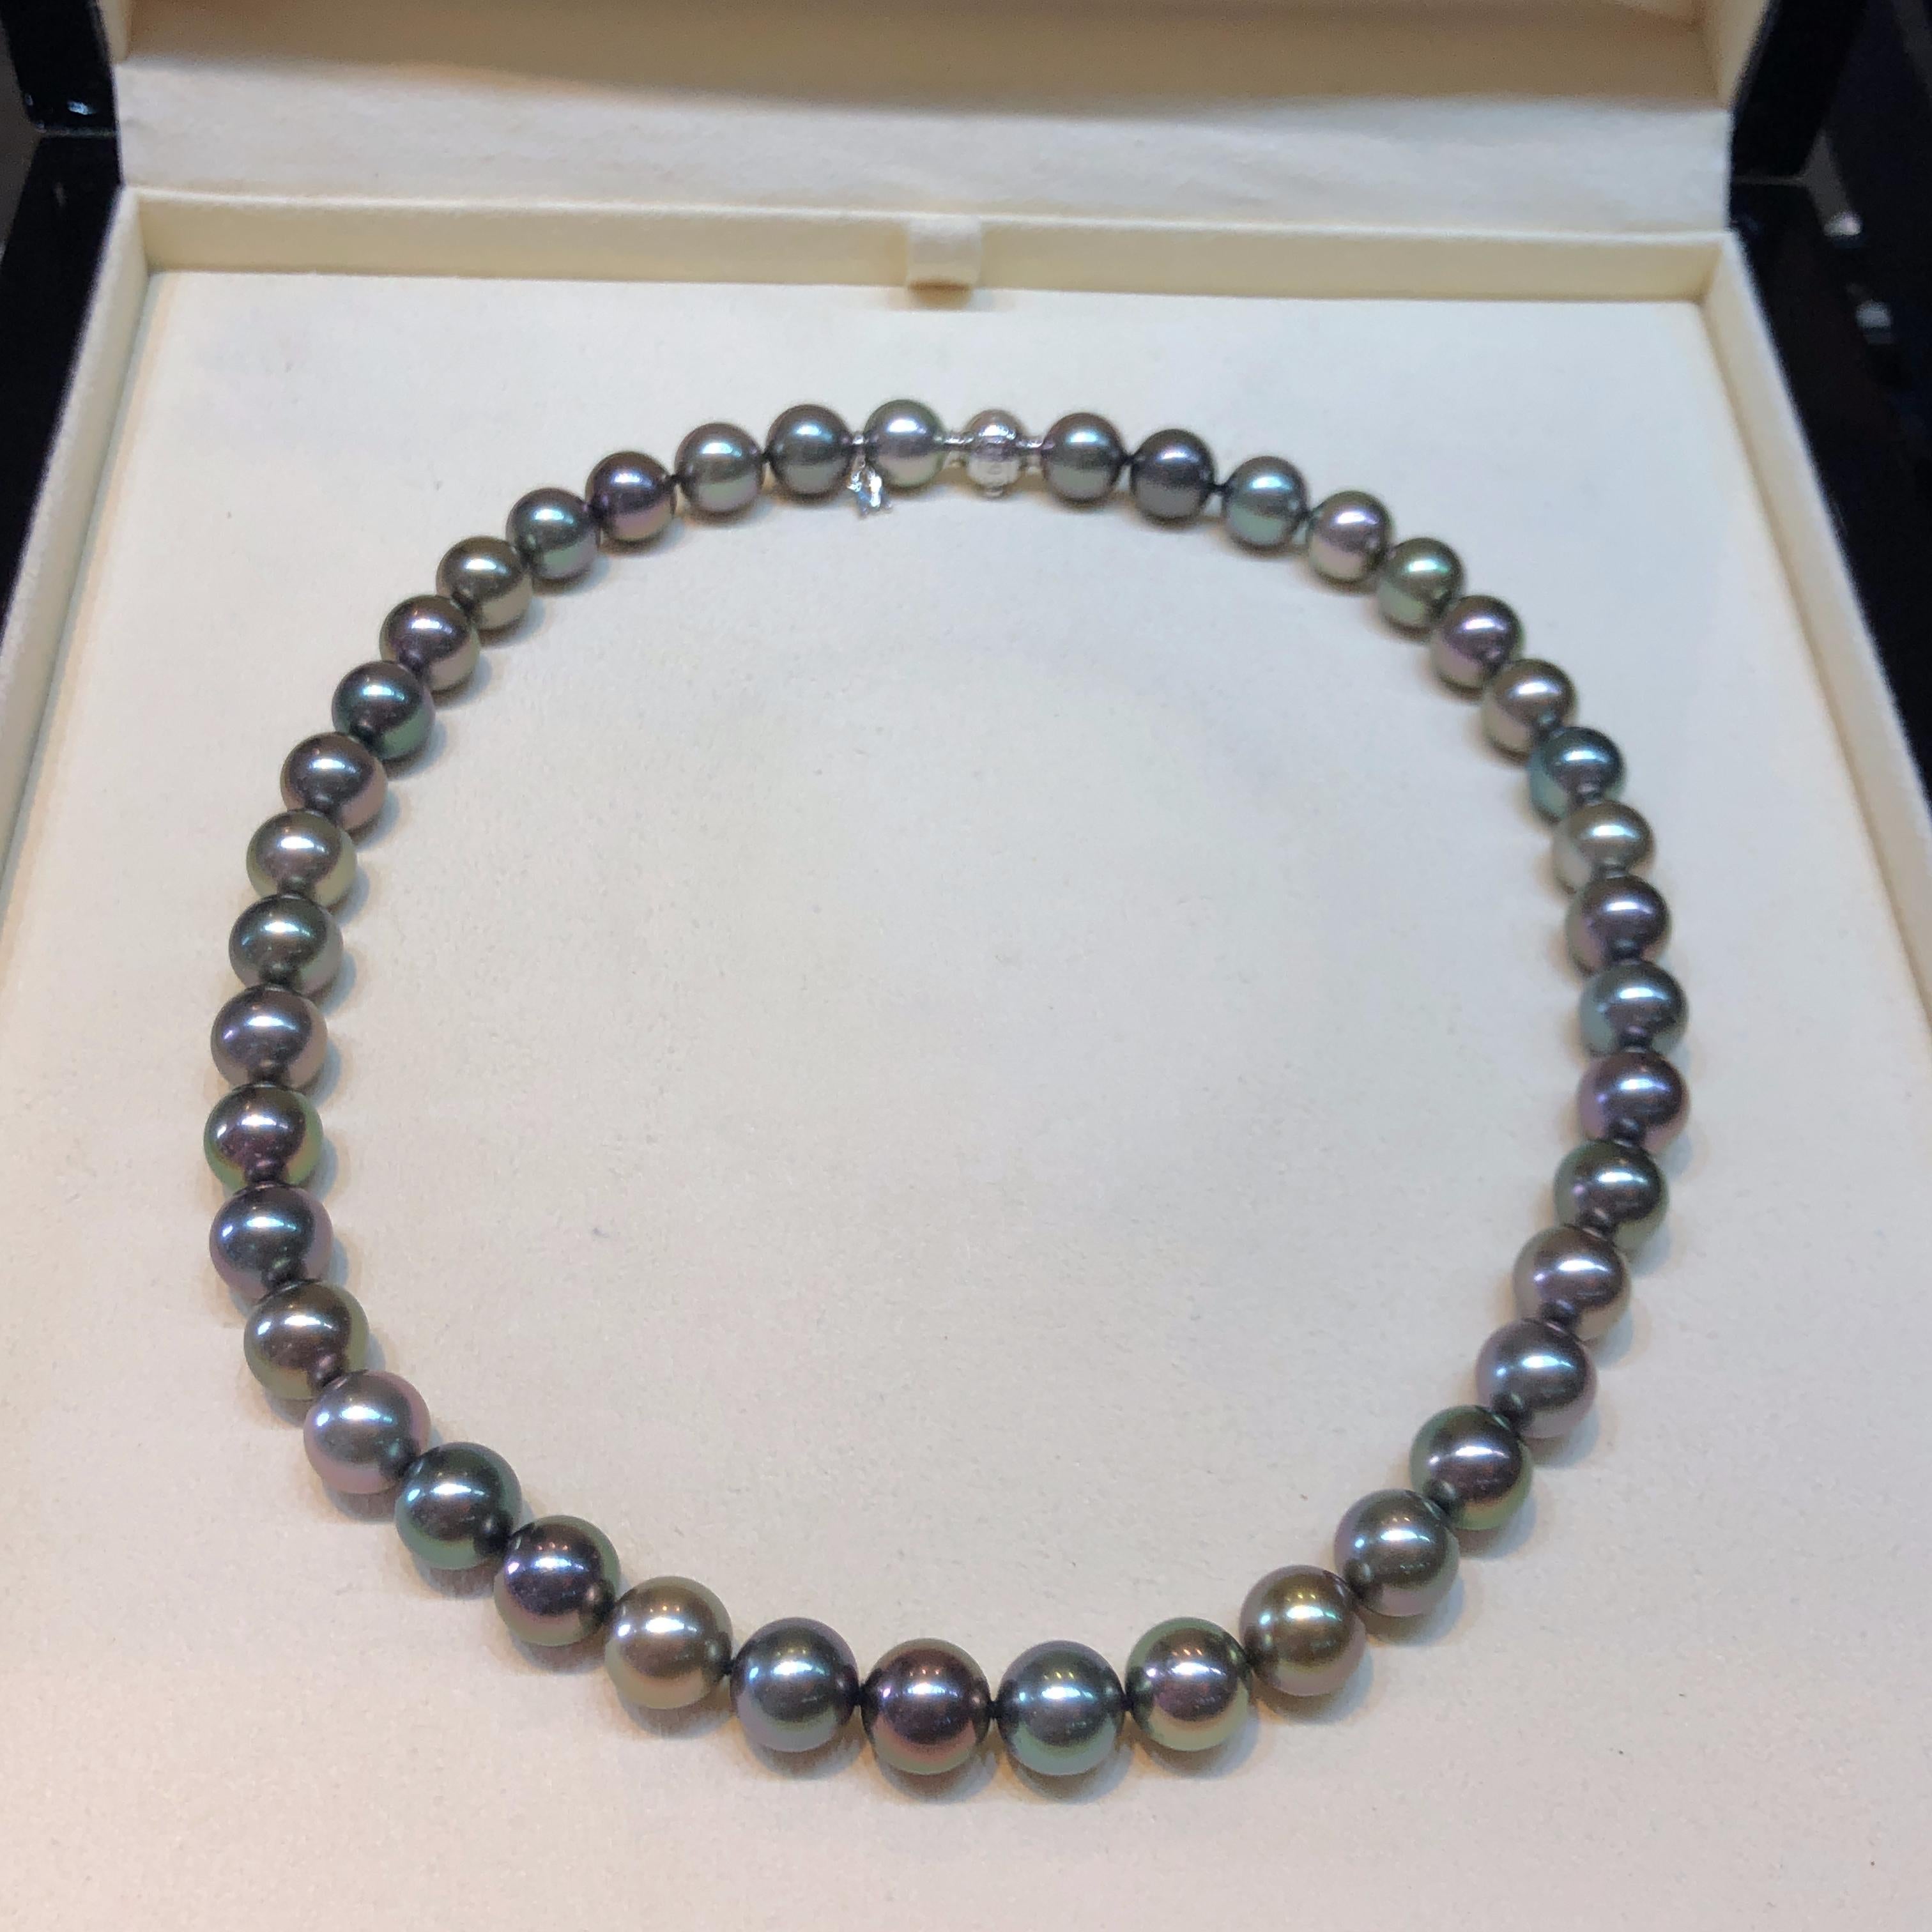 Round Cut Mikimoto South Sea Pearl Necklace with White Gold Clasp